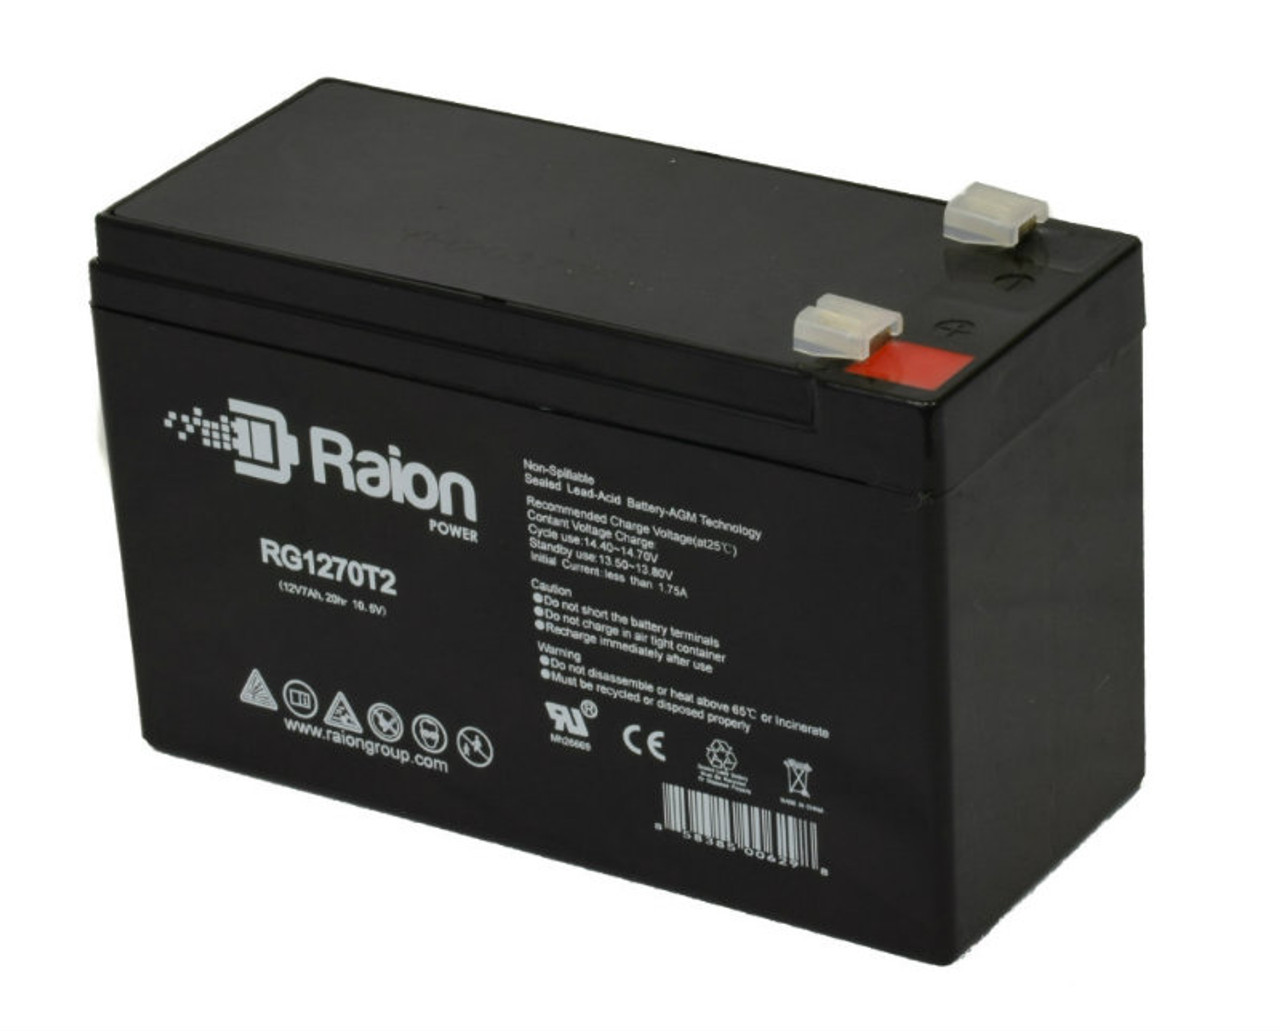 Raion Power RG1270T1 12V 7Ah Non-Spillable Replacement Battery for Power Rite PRB127-F1